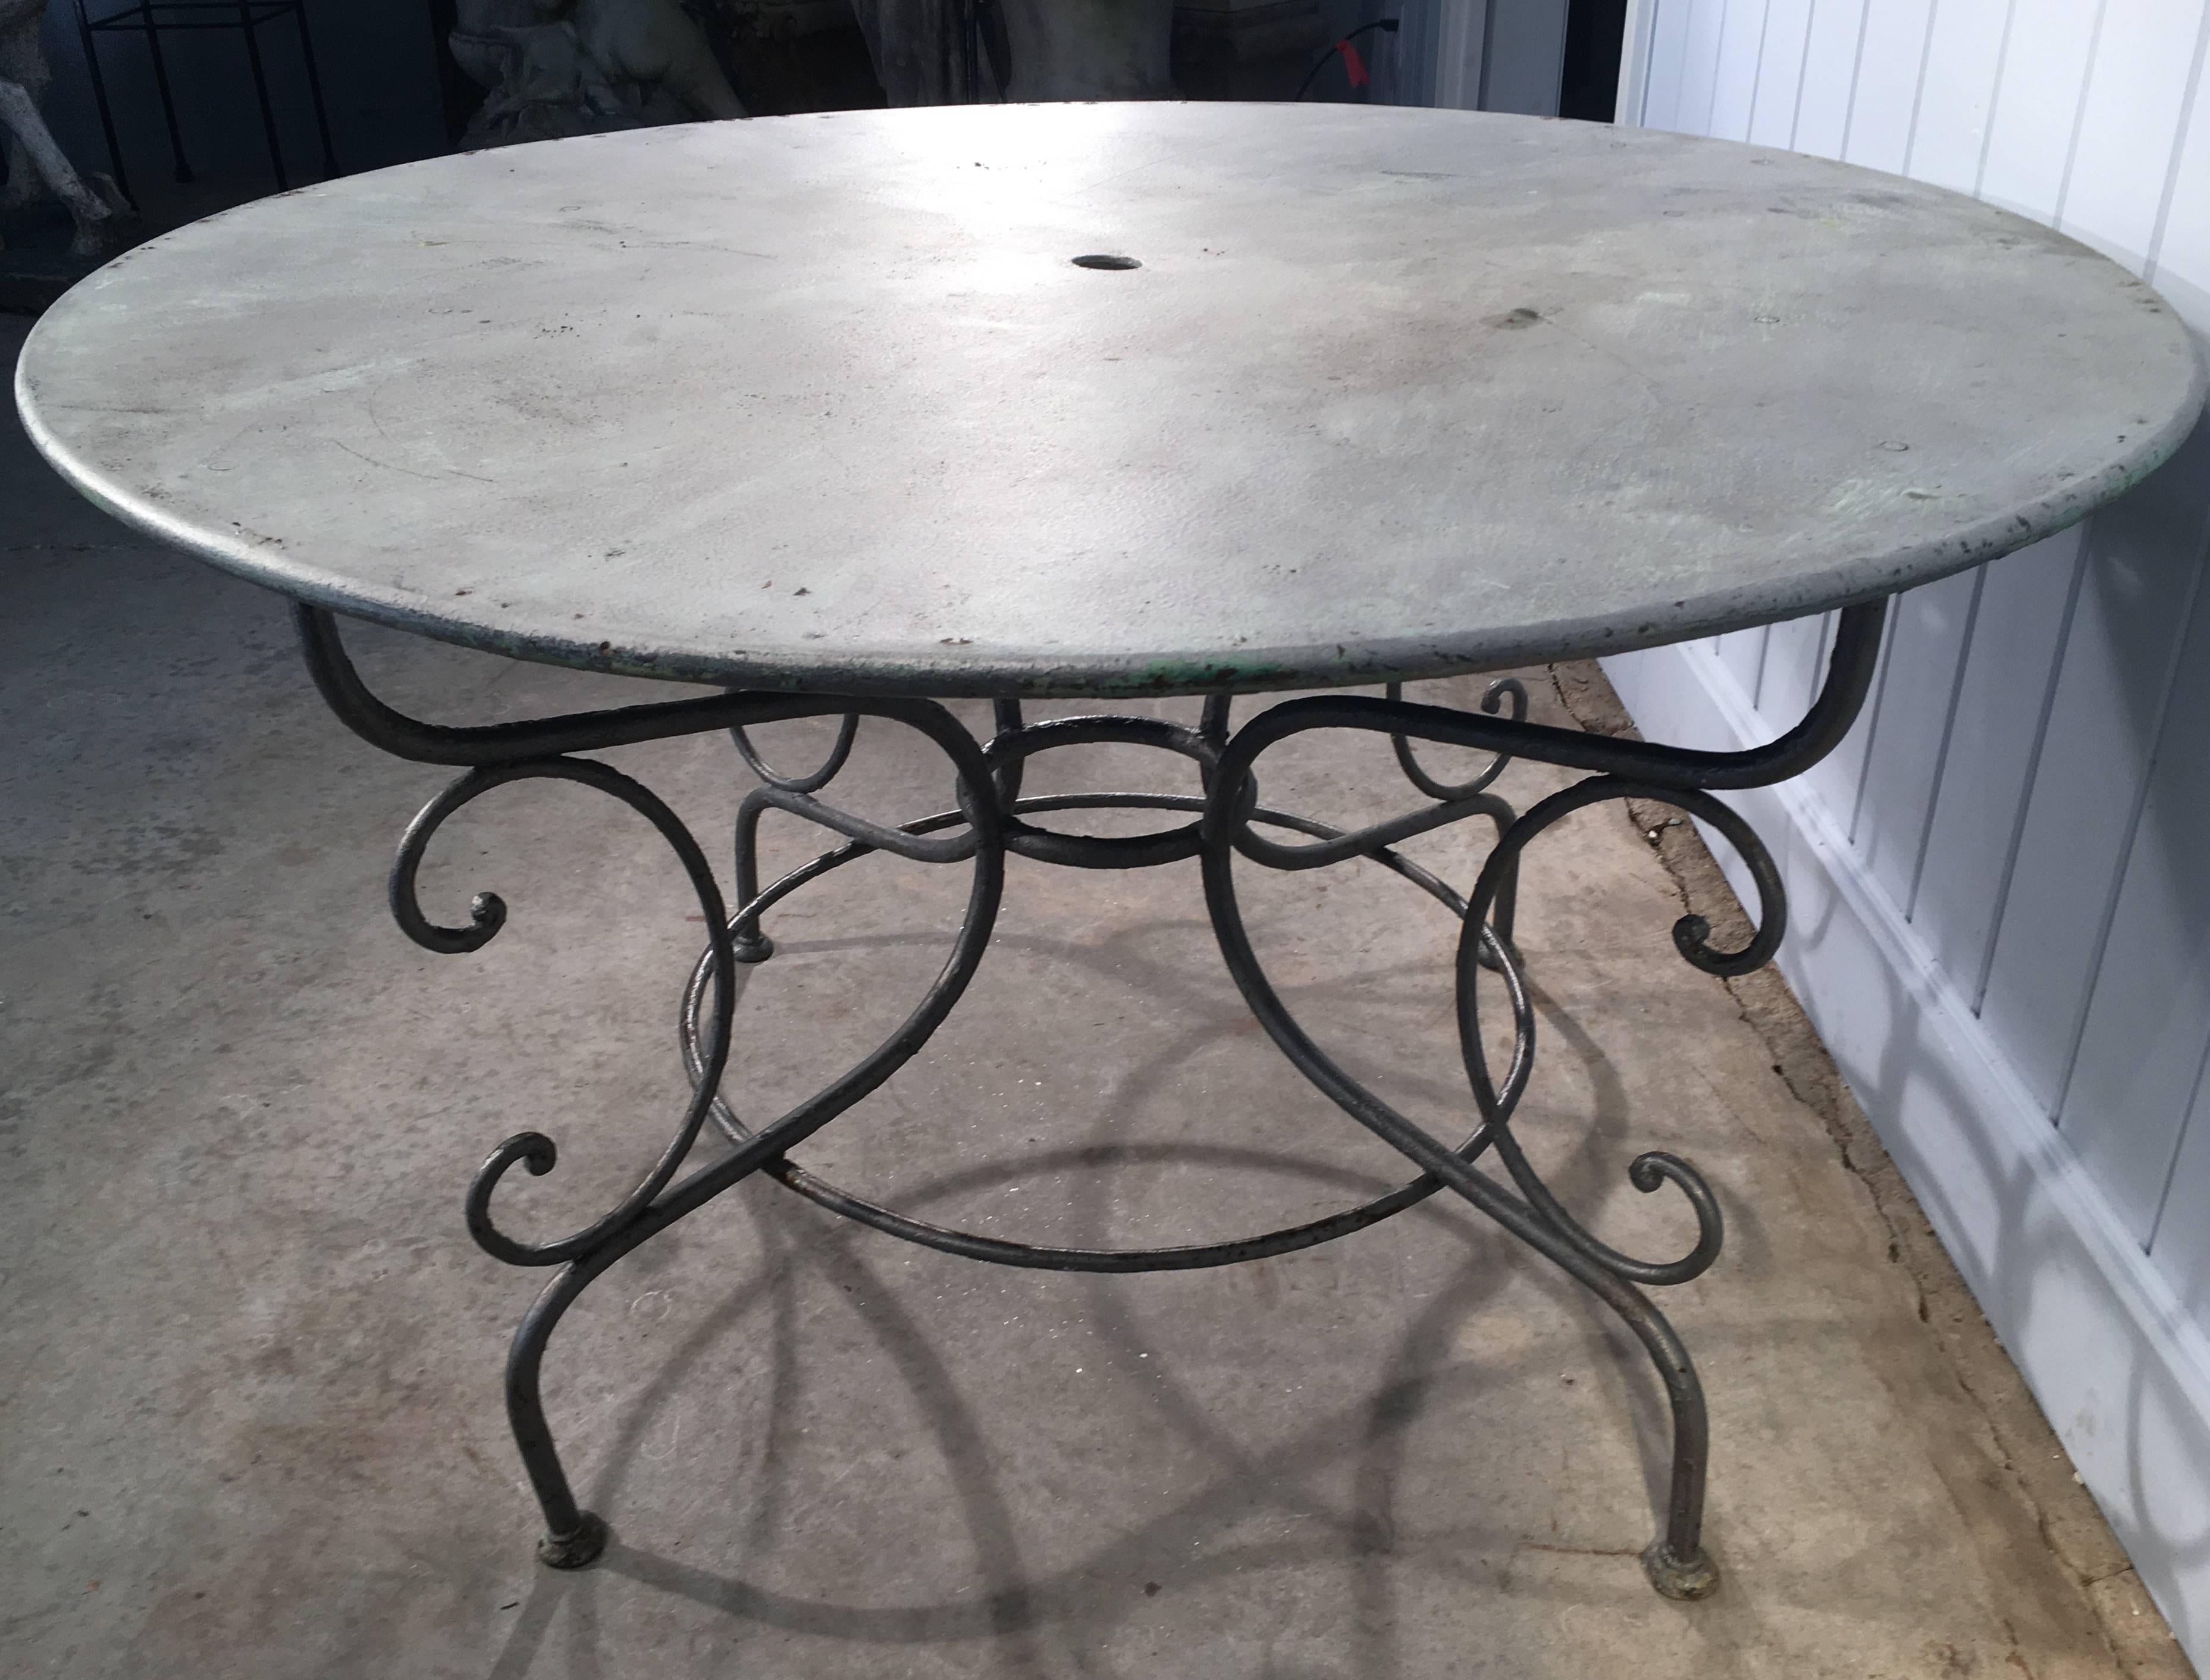 20th Century French Wrought Iron Round Dining Table with Scrolled Base